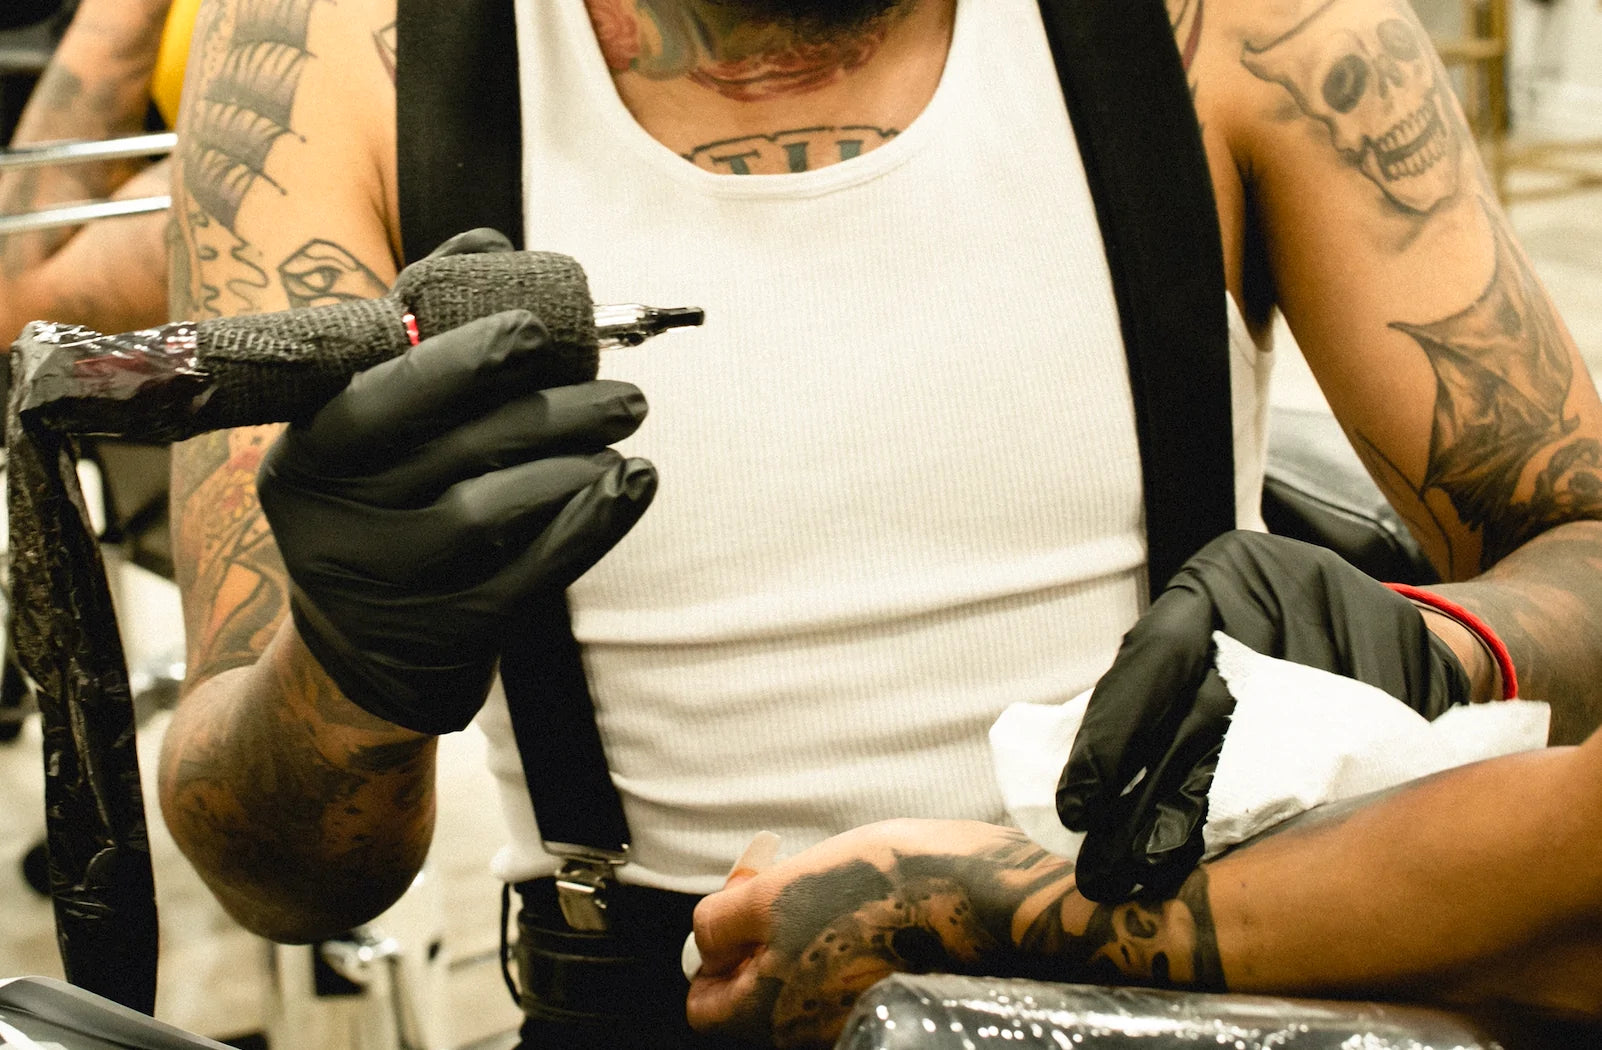 Infected Tattoos 5 Things to Look For After Getting Inked